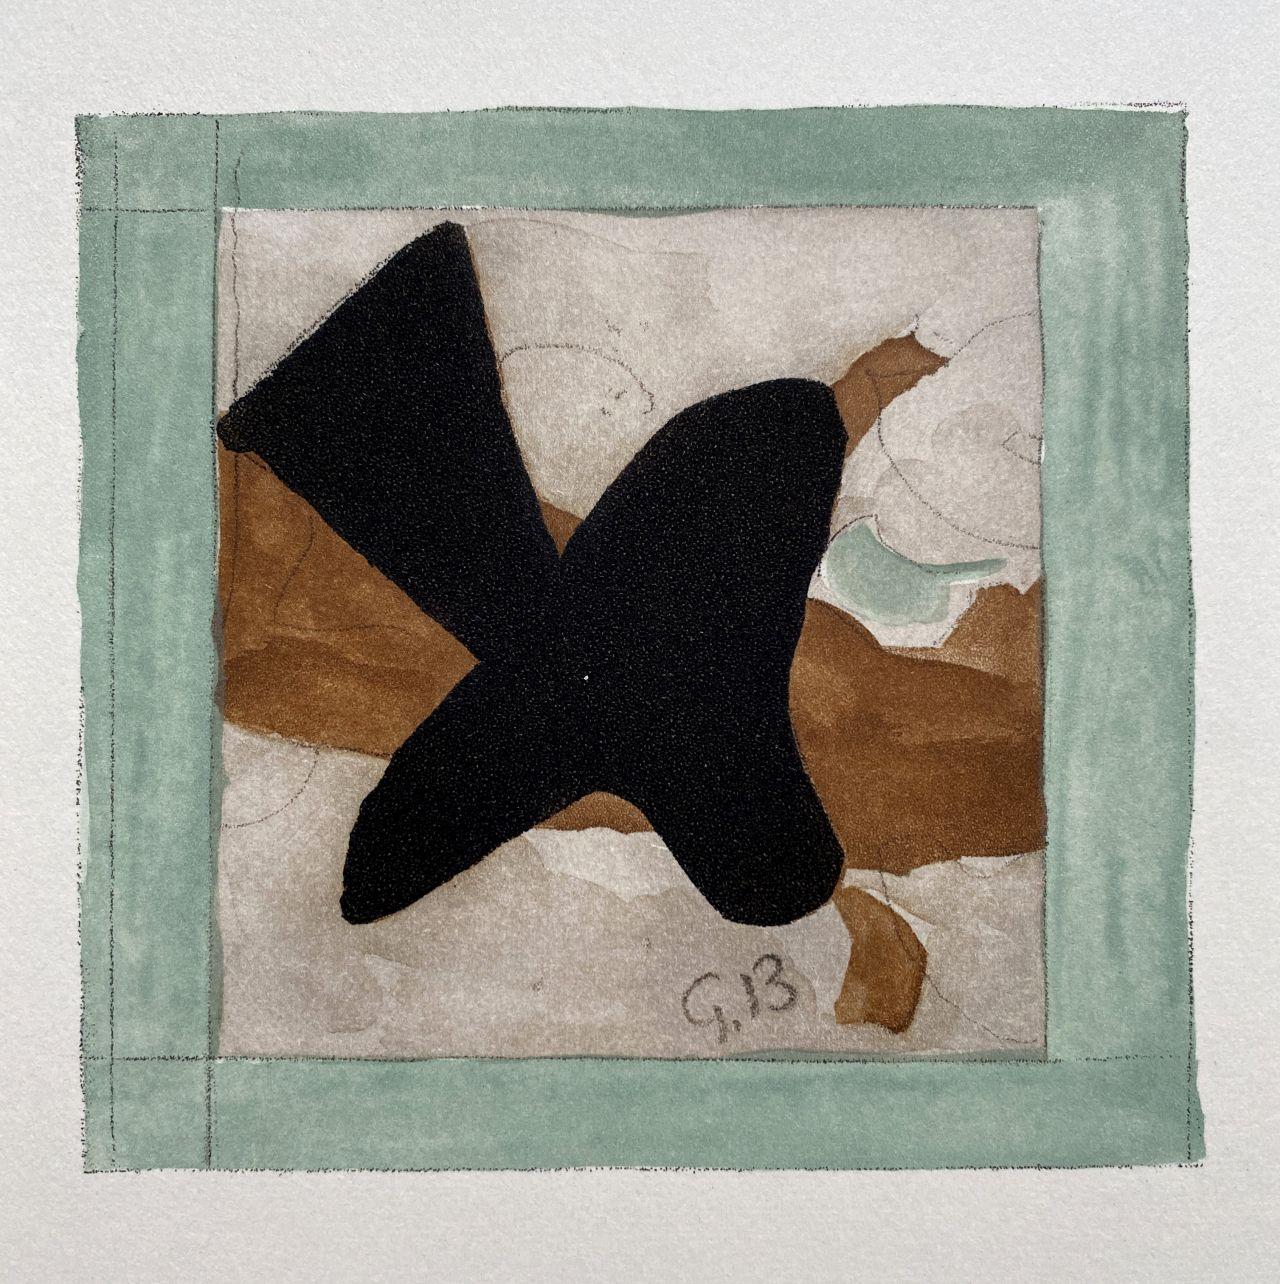 Georges Braque (after)
The bird

Etching in colors (Crommelynck workshop)
Signed in the plate with the monogramme
Edition of 250 copies
On Arches vellum size 38 x 28 cm (c. 15 x 11 in)
Very good condition

REFERENCES : Catalog raisonné Orozco 